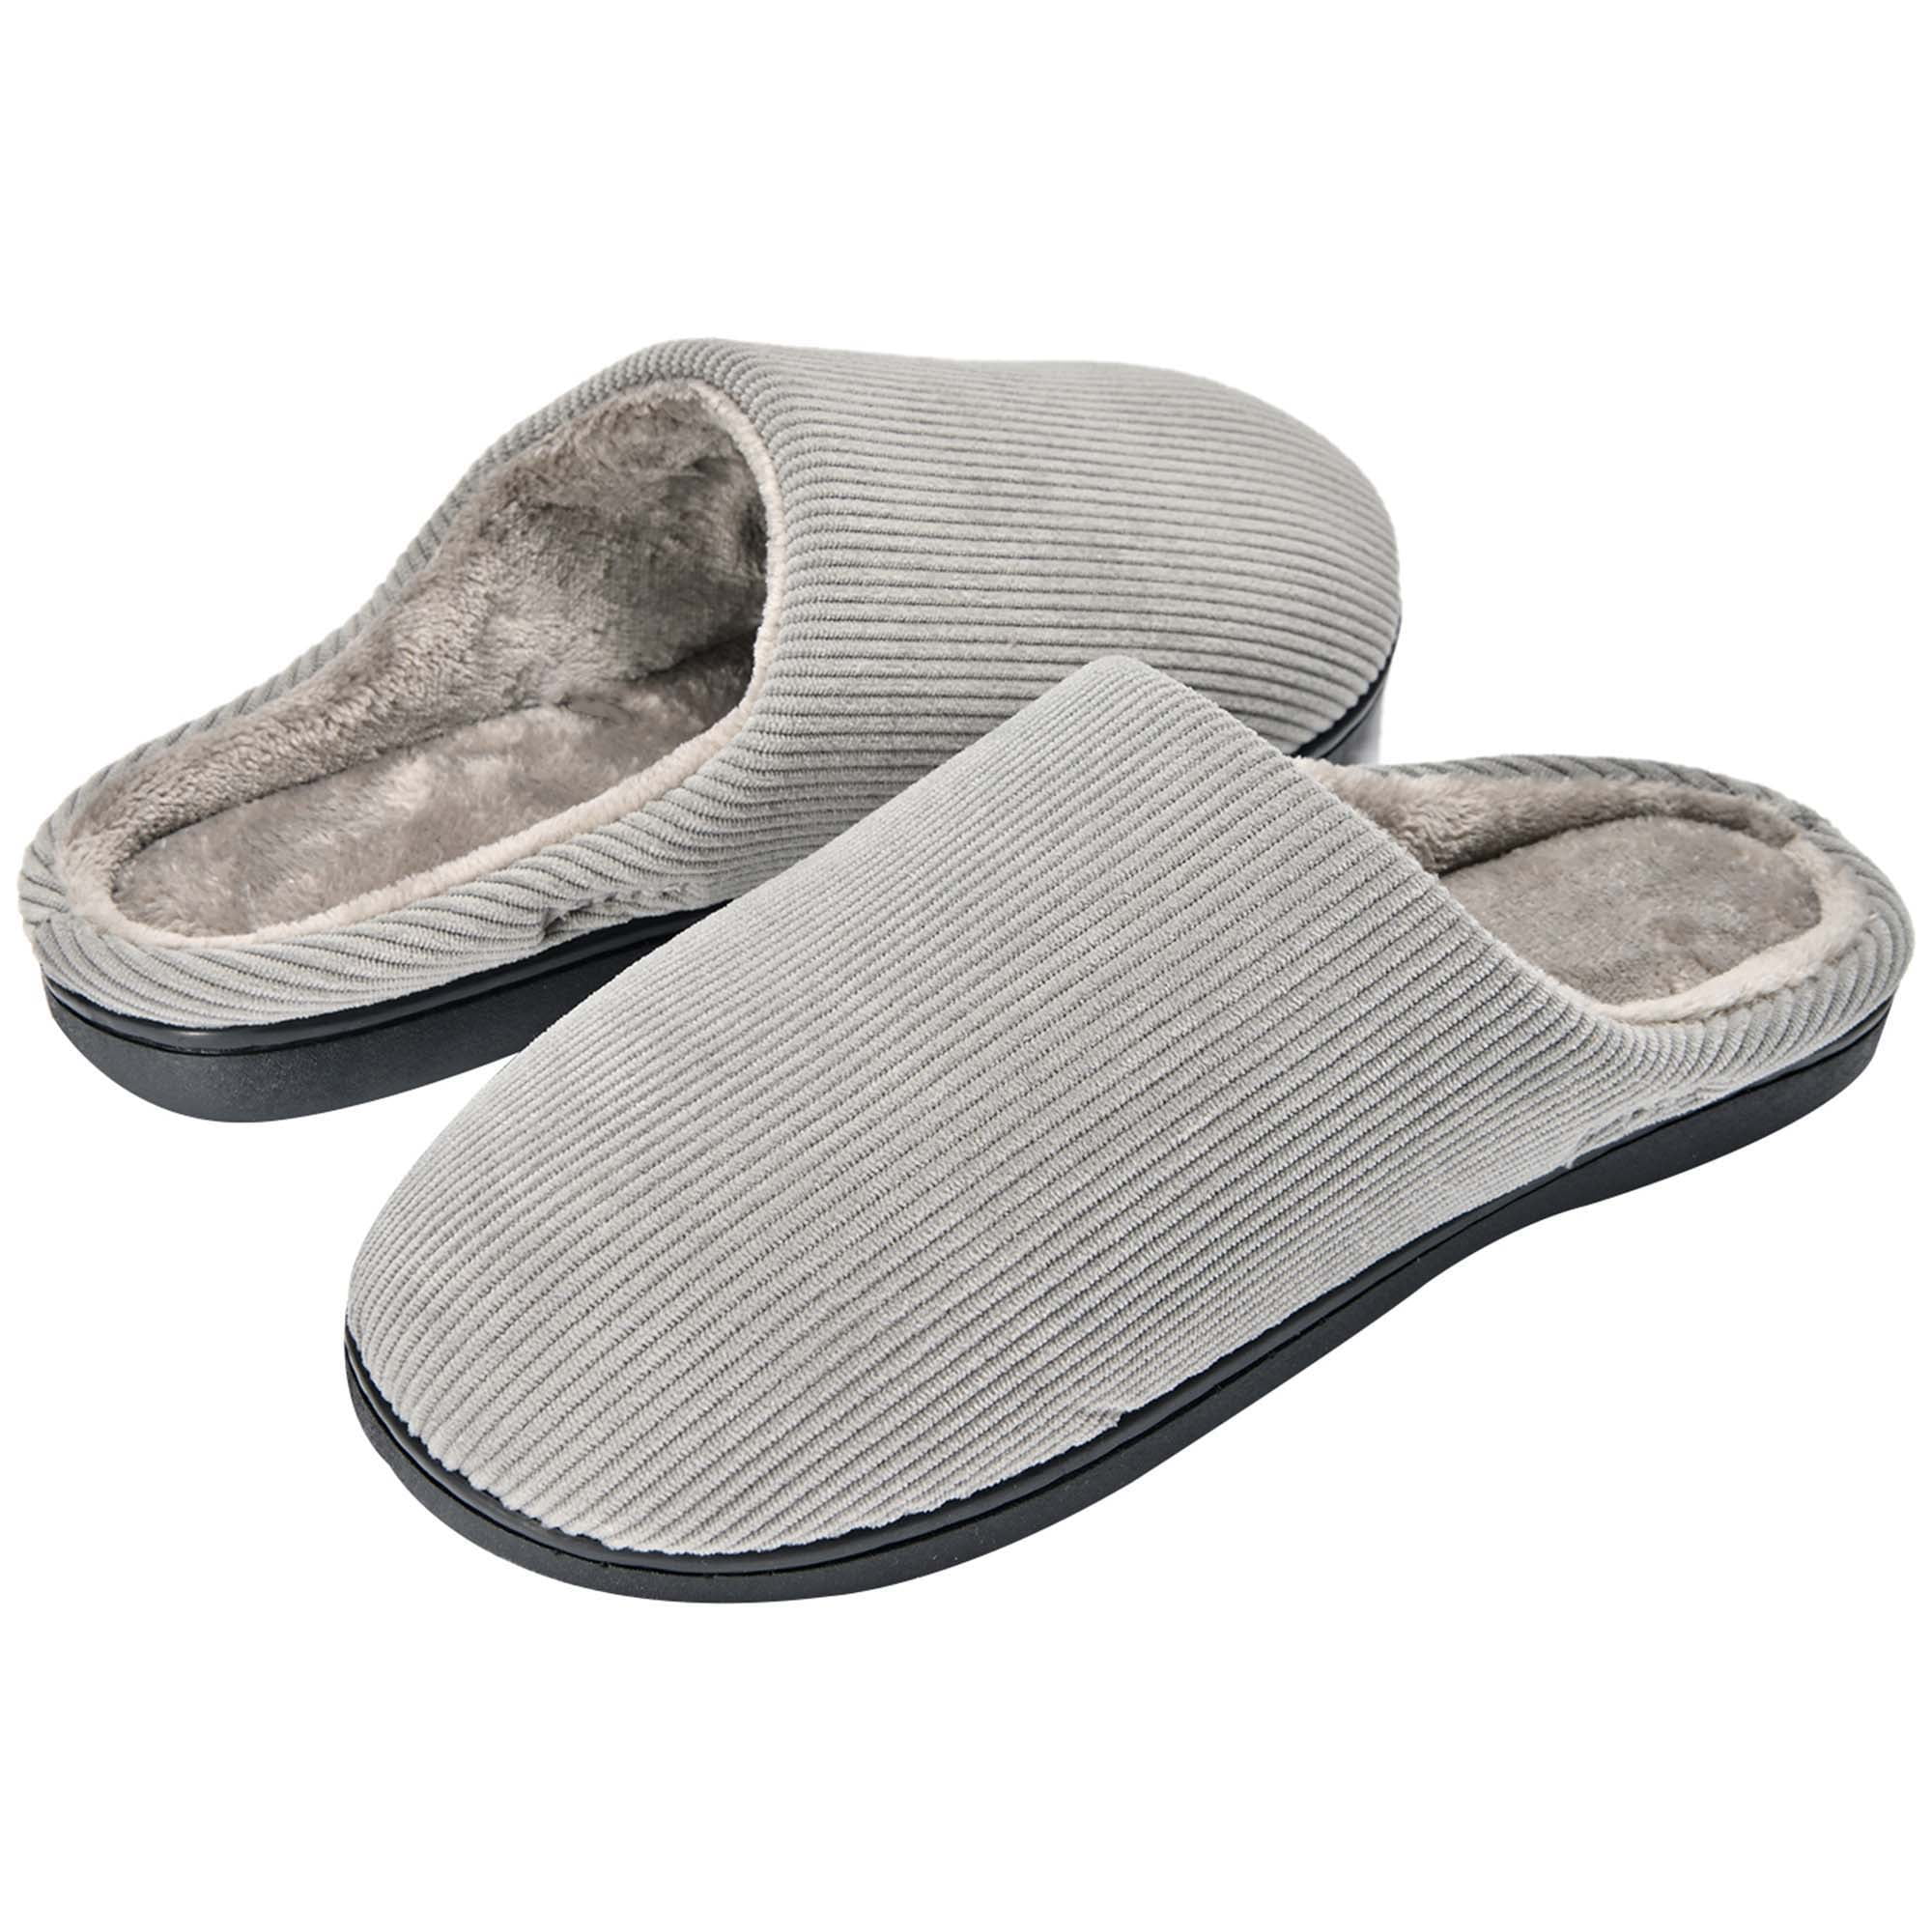 landeer Women's and Men's Memory Foam Slippers Casual House Shoes